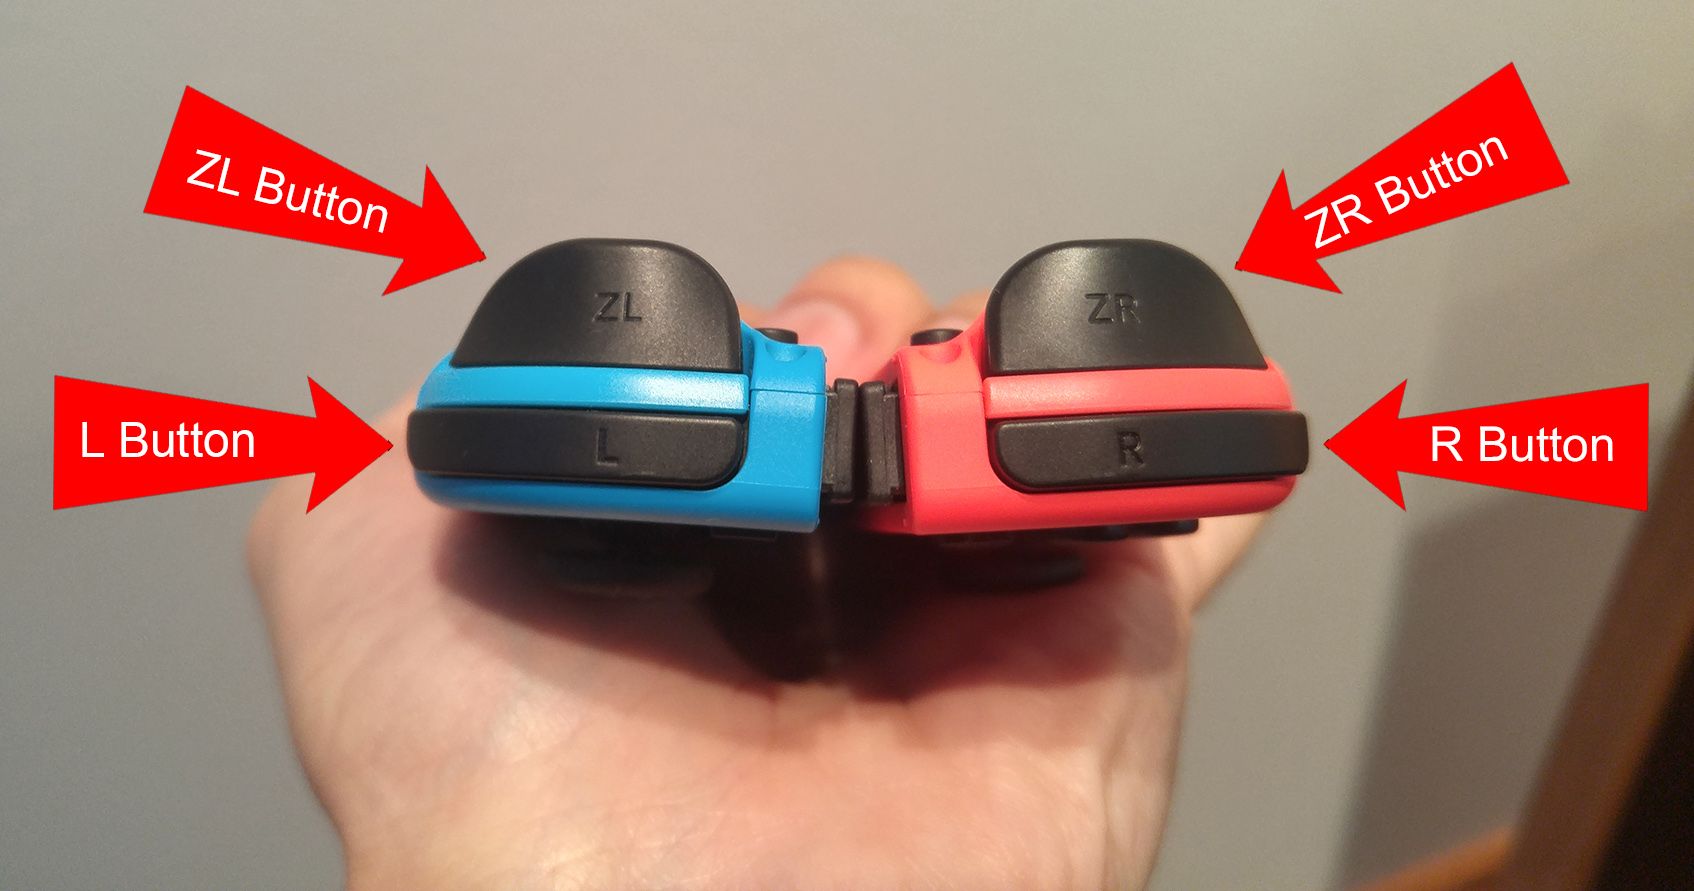 Red arrows pointing and labeling each of the shoulder buttons on a pair of Joy-Cons.